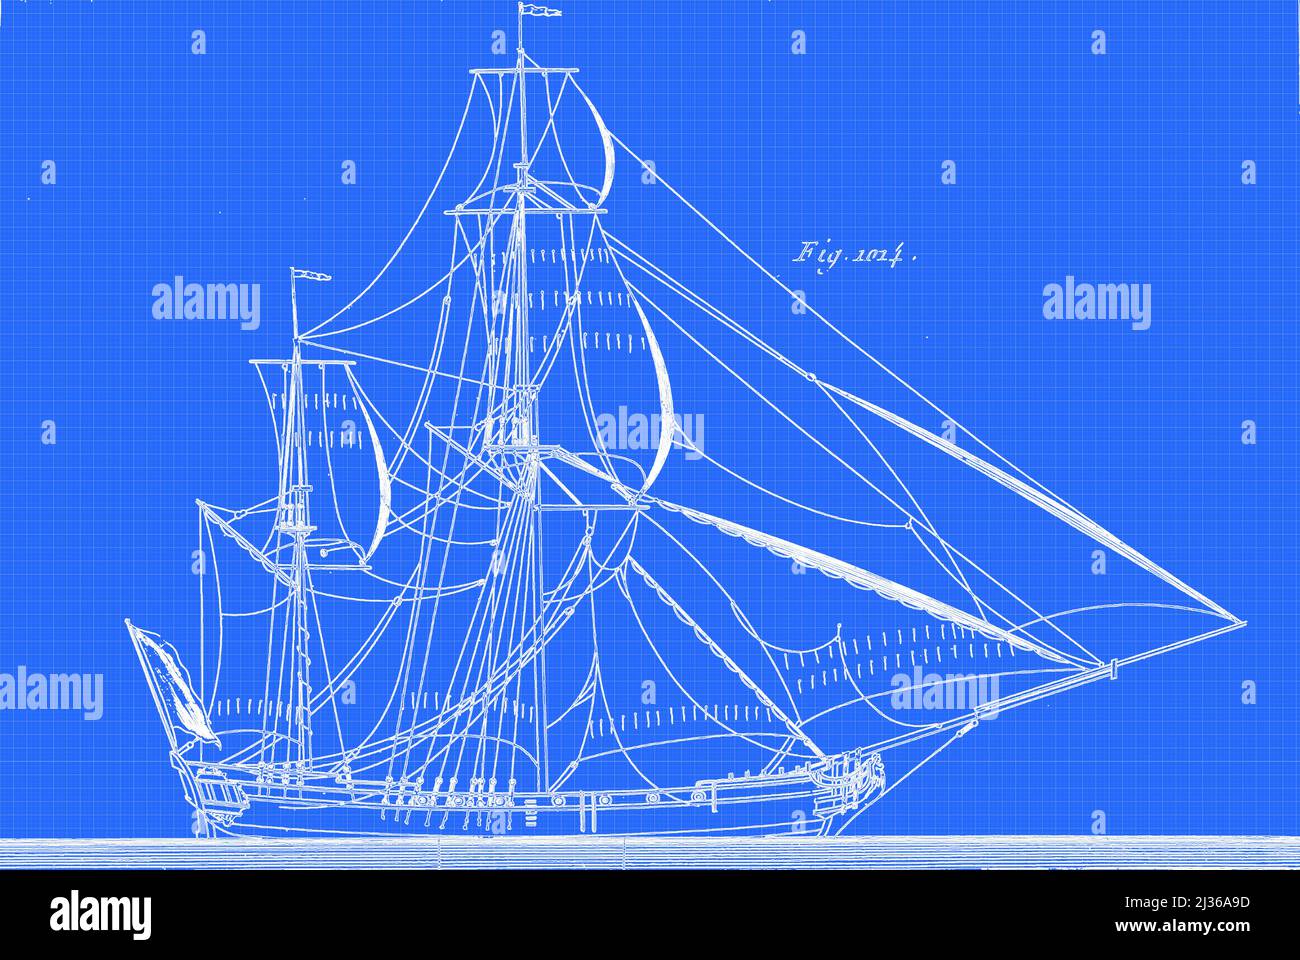 18th Century ship designs From the Encyclopédie méthodique Maritime Encyclopedia Publisher Paris : Panckoucke ; Liège : Plomteux in 1787 containing drawings and blueprints of shipbuilding,  and Illustrations of maritime subjects plates drawn by Benard direxit Stock Photo